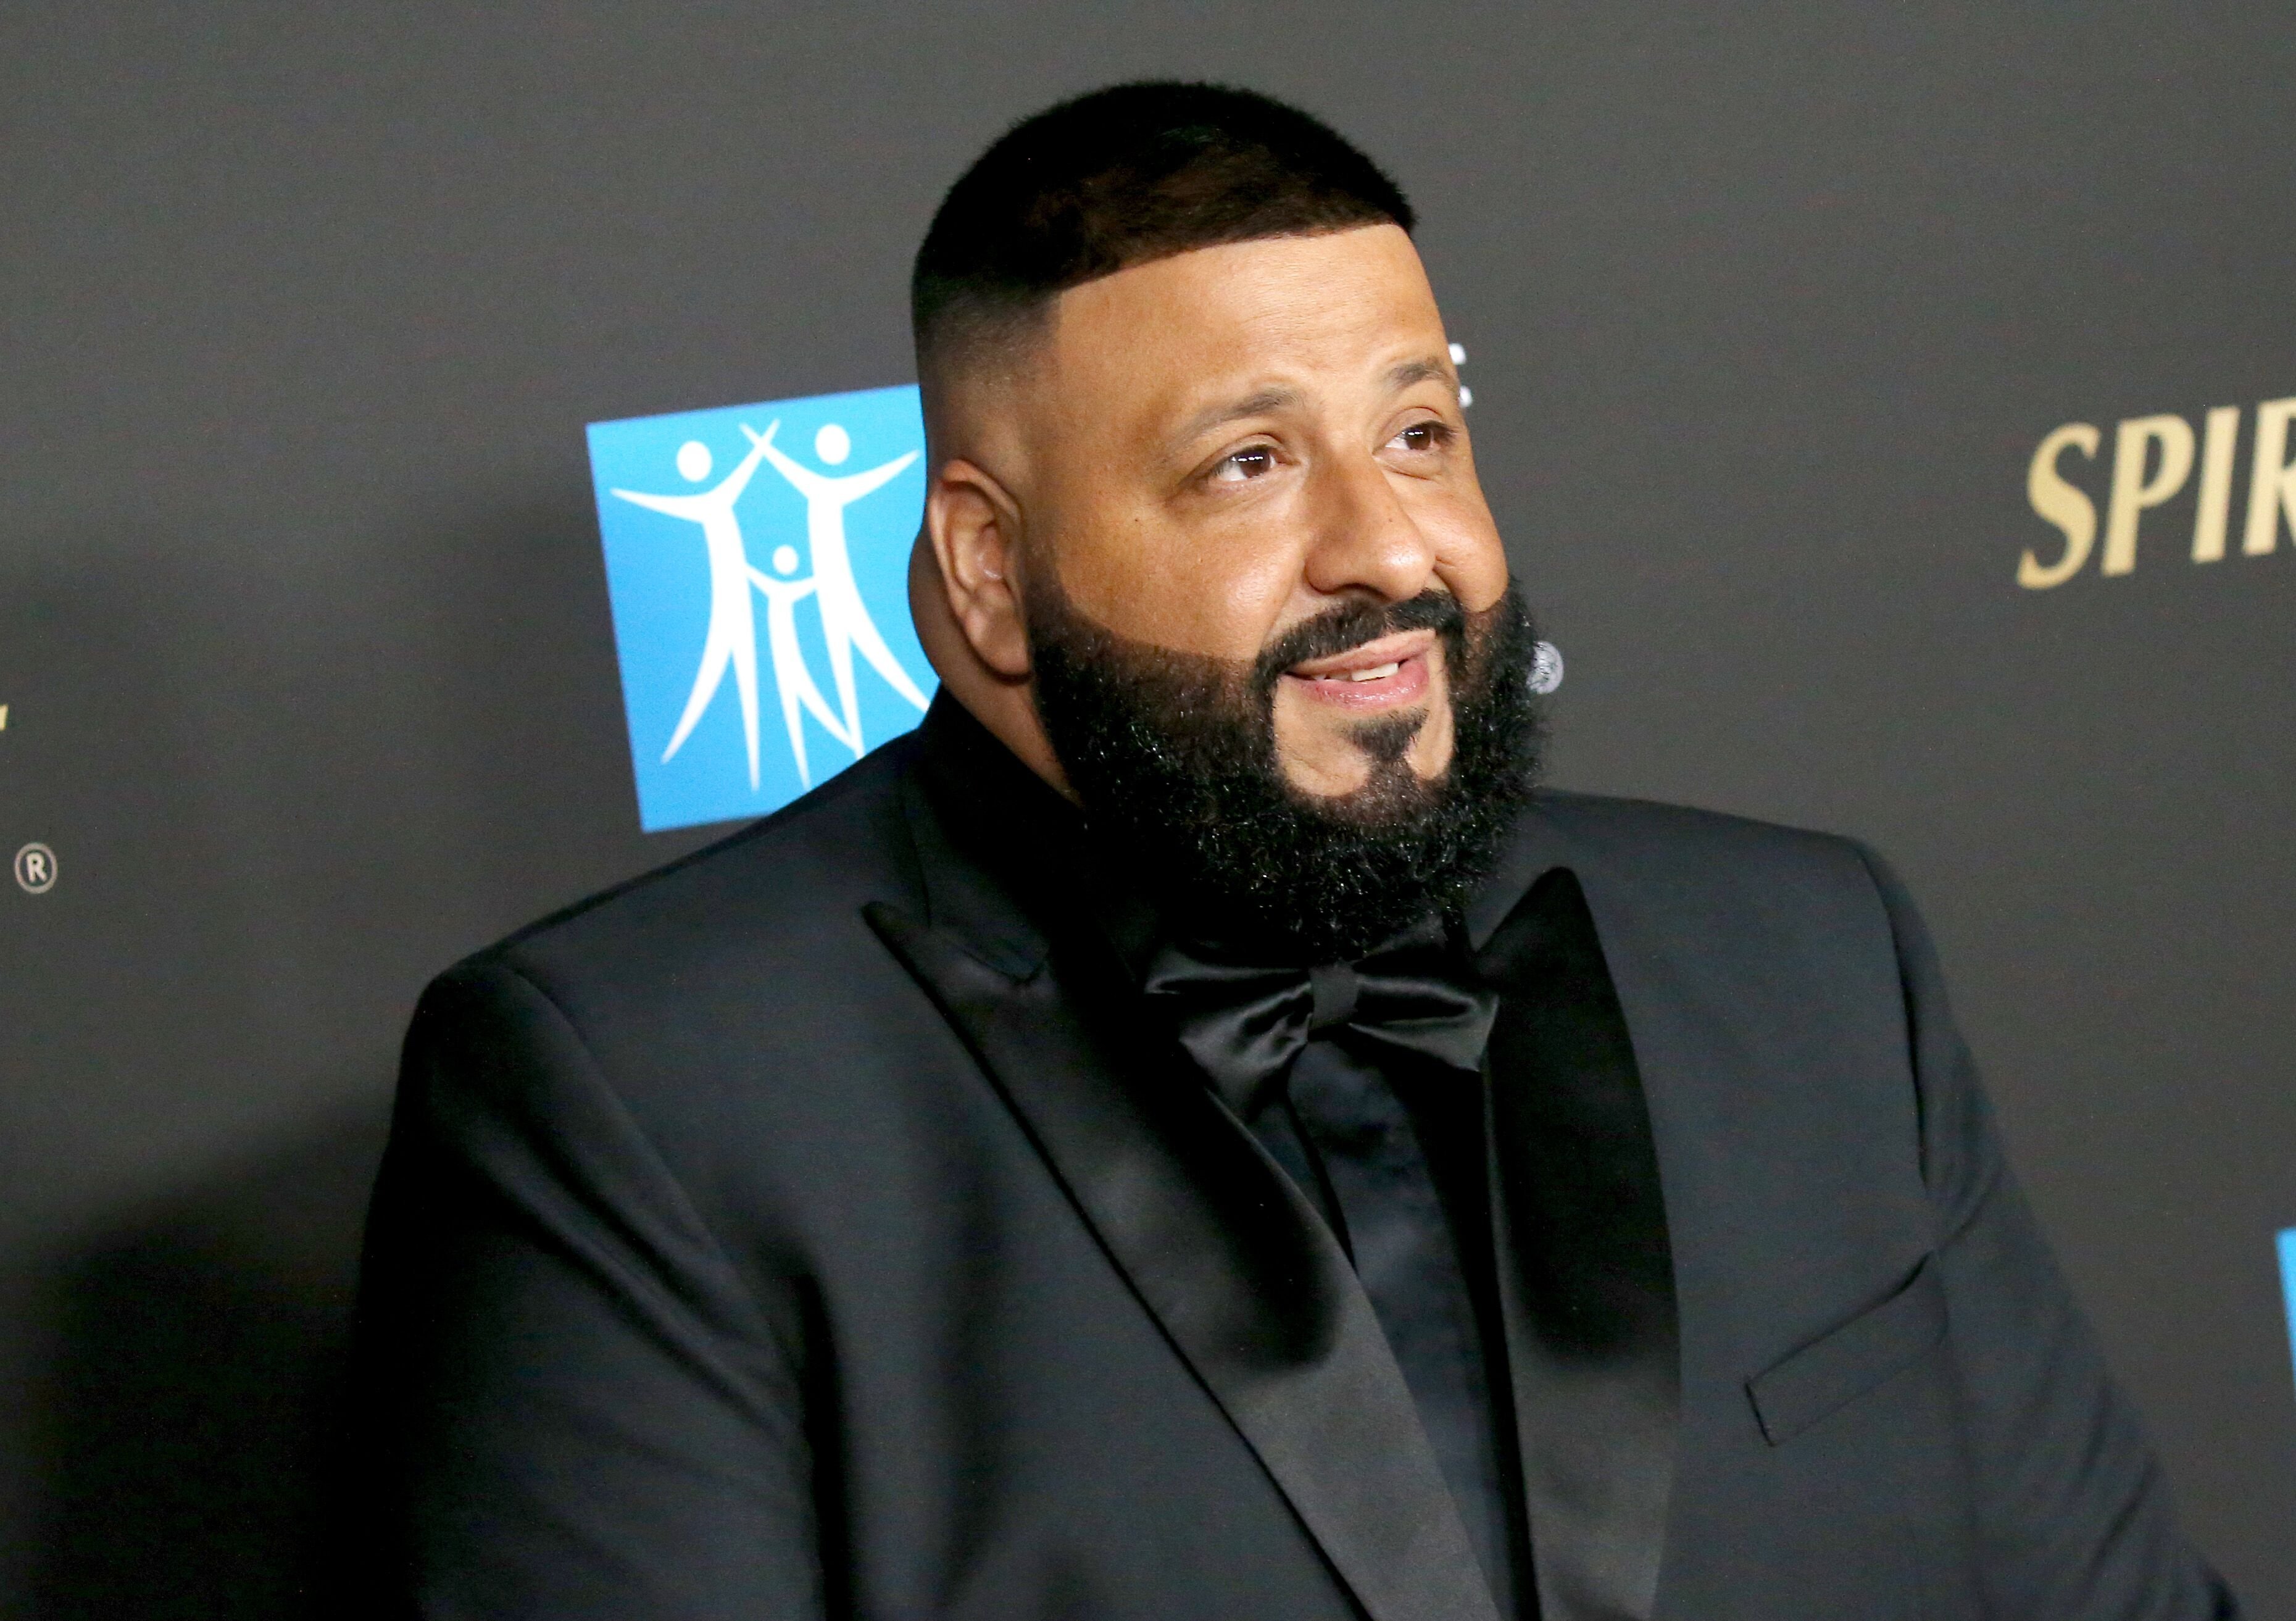 DJ Khaled attending City of Hope's Spirit of Life 2019 Gala. | Photo: Getty Images